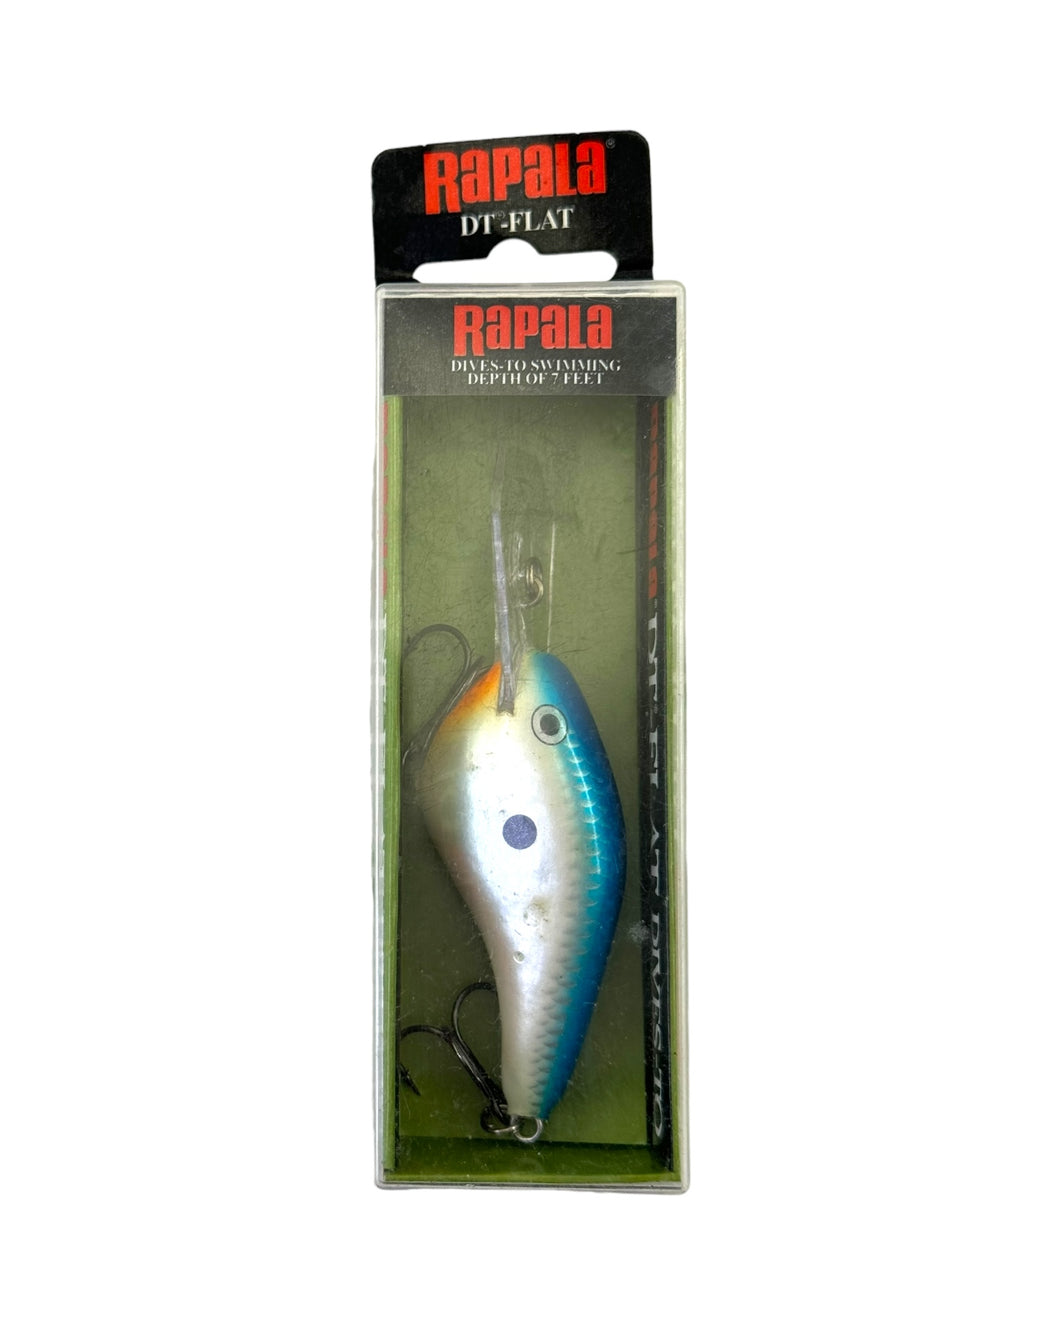 RAPALA DT (Dives-To) FLAT Fishing Lure in BLUE SHAD. # DTF07 BSD.